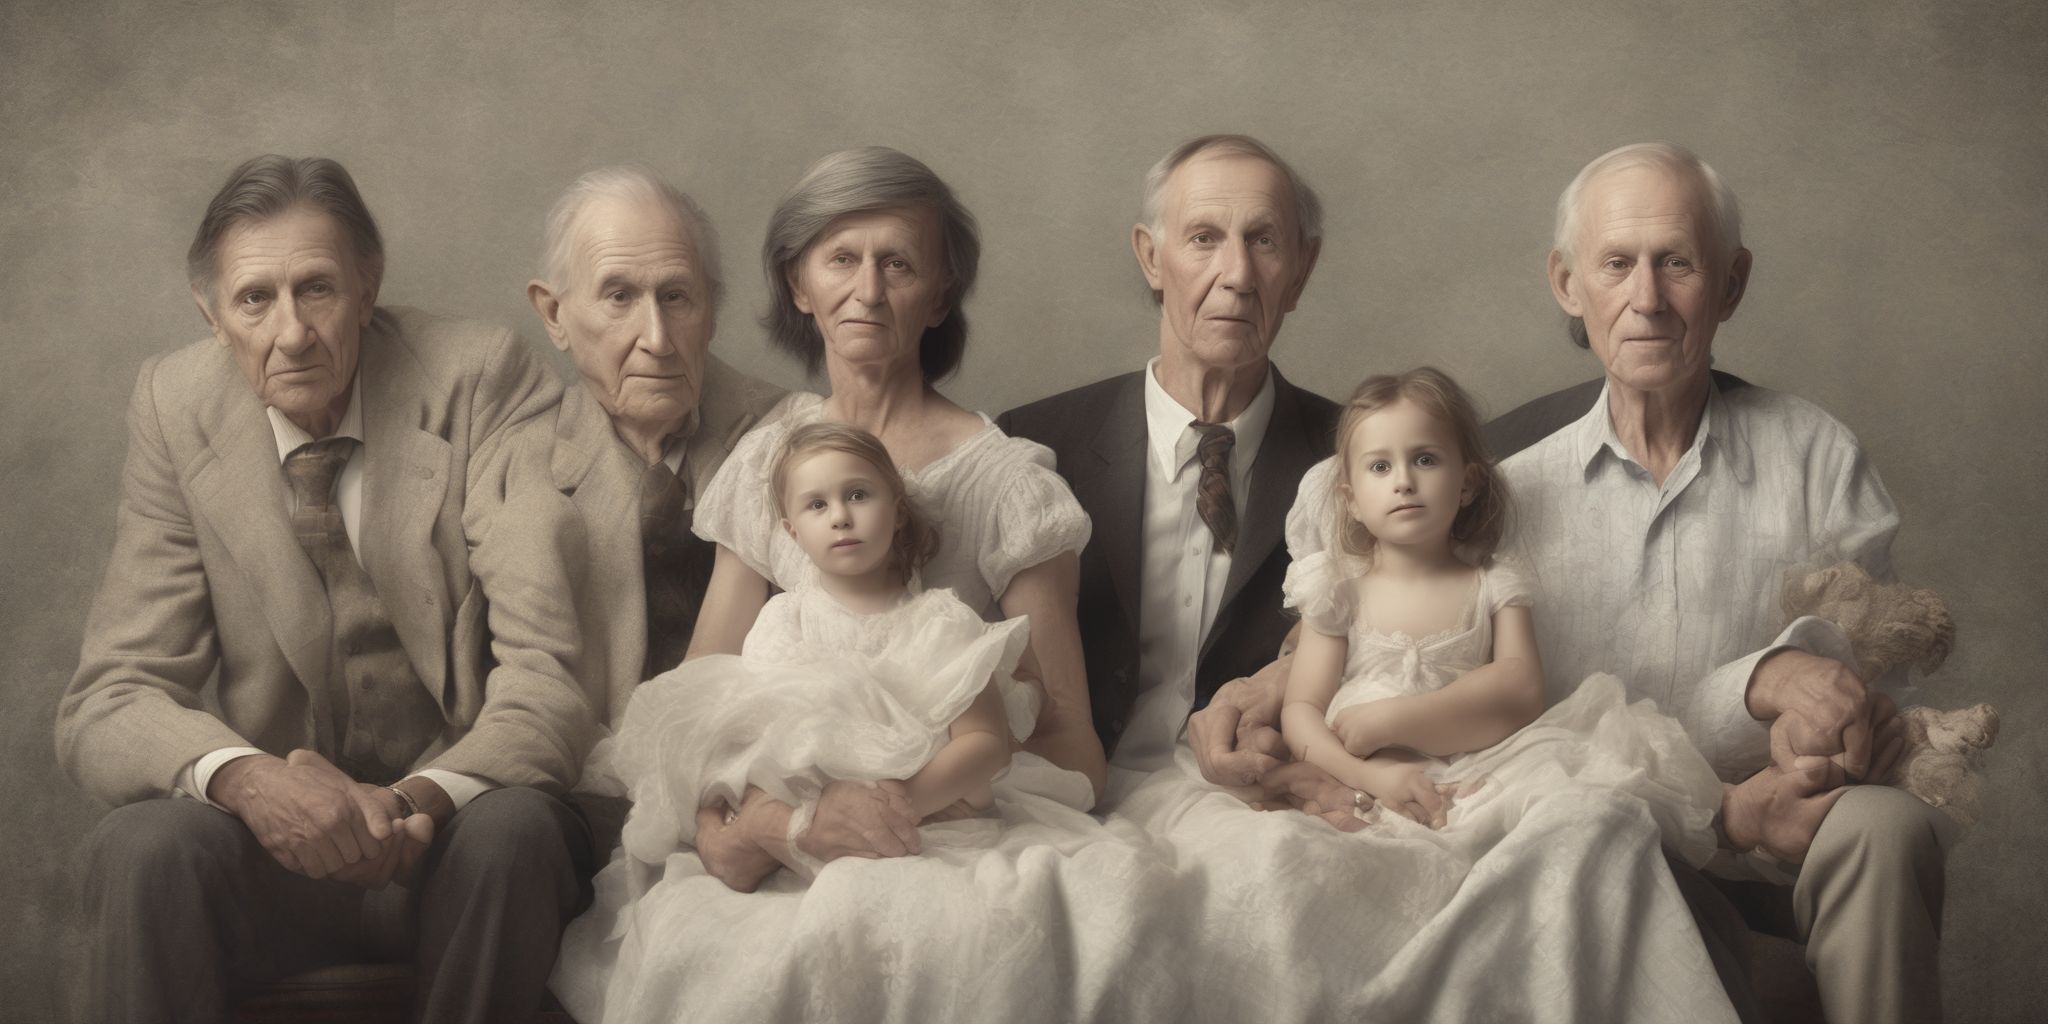 Inheritance  in realistic, photographic style